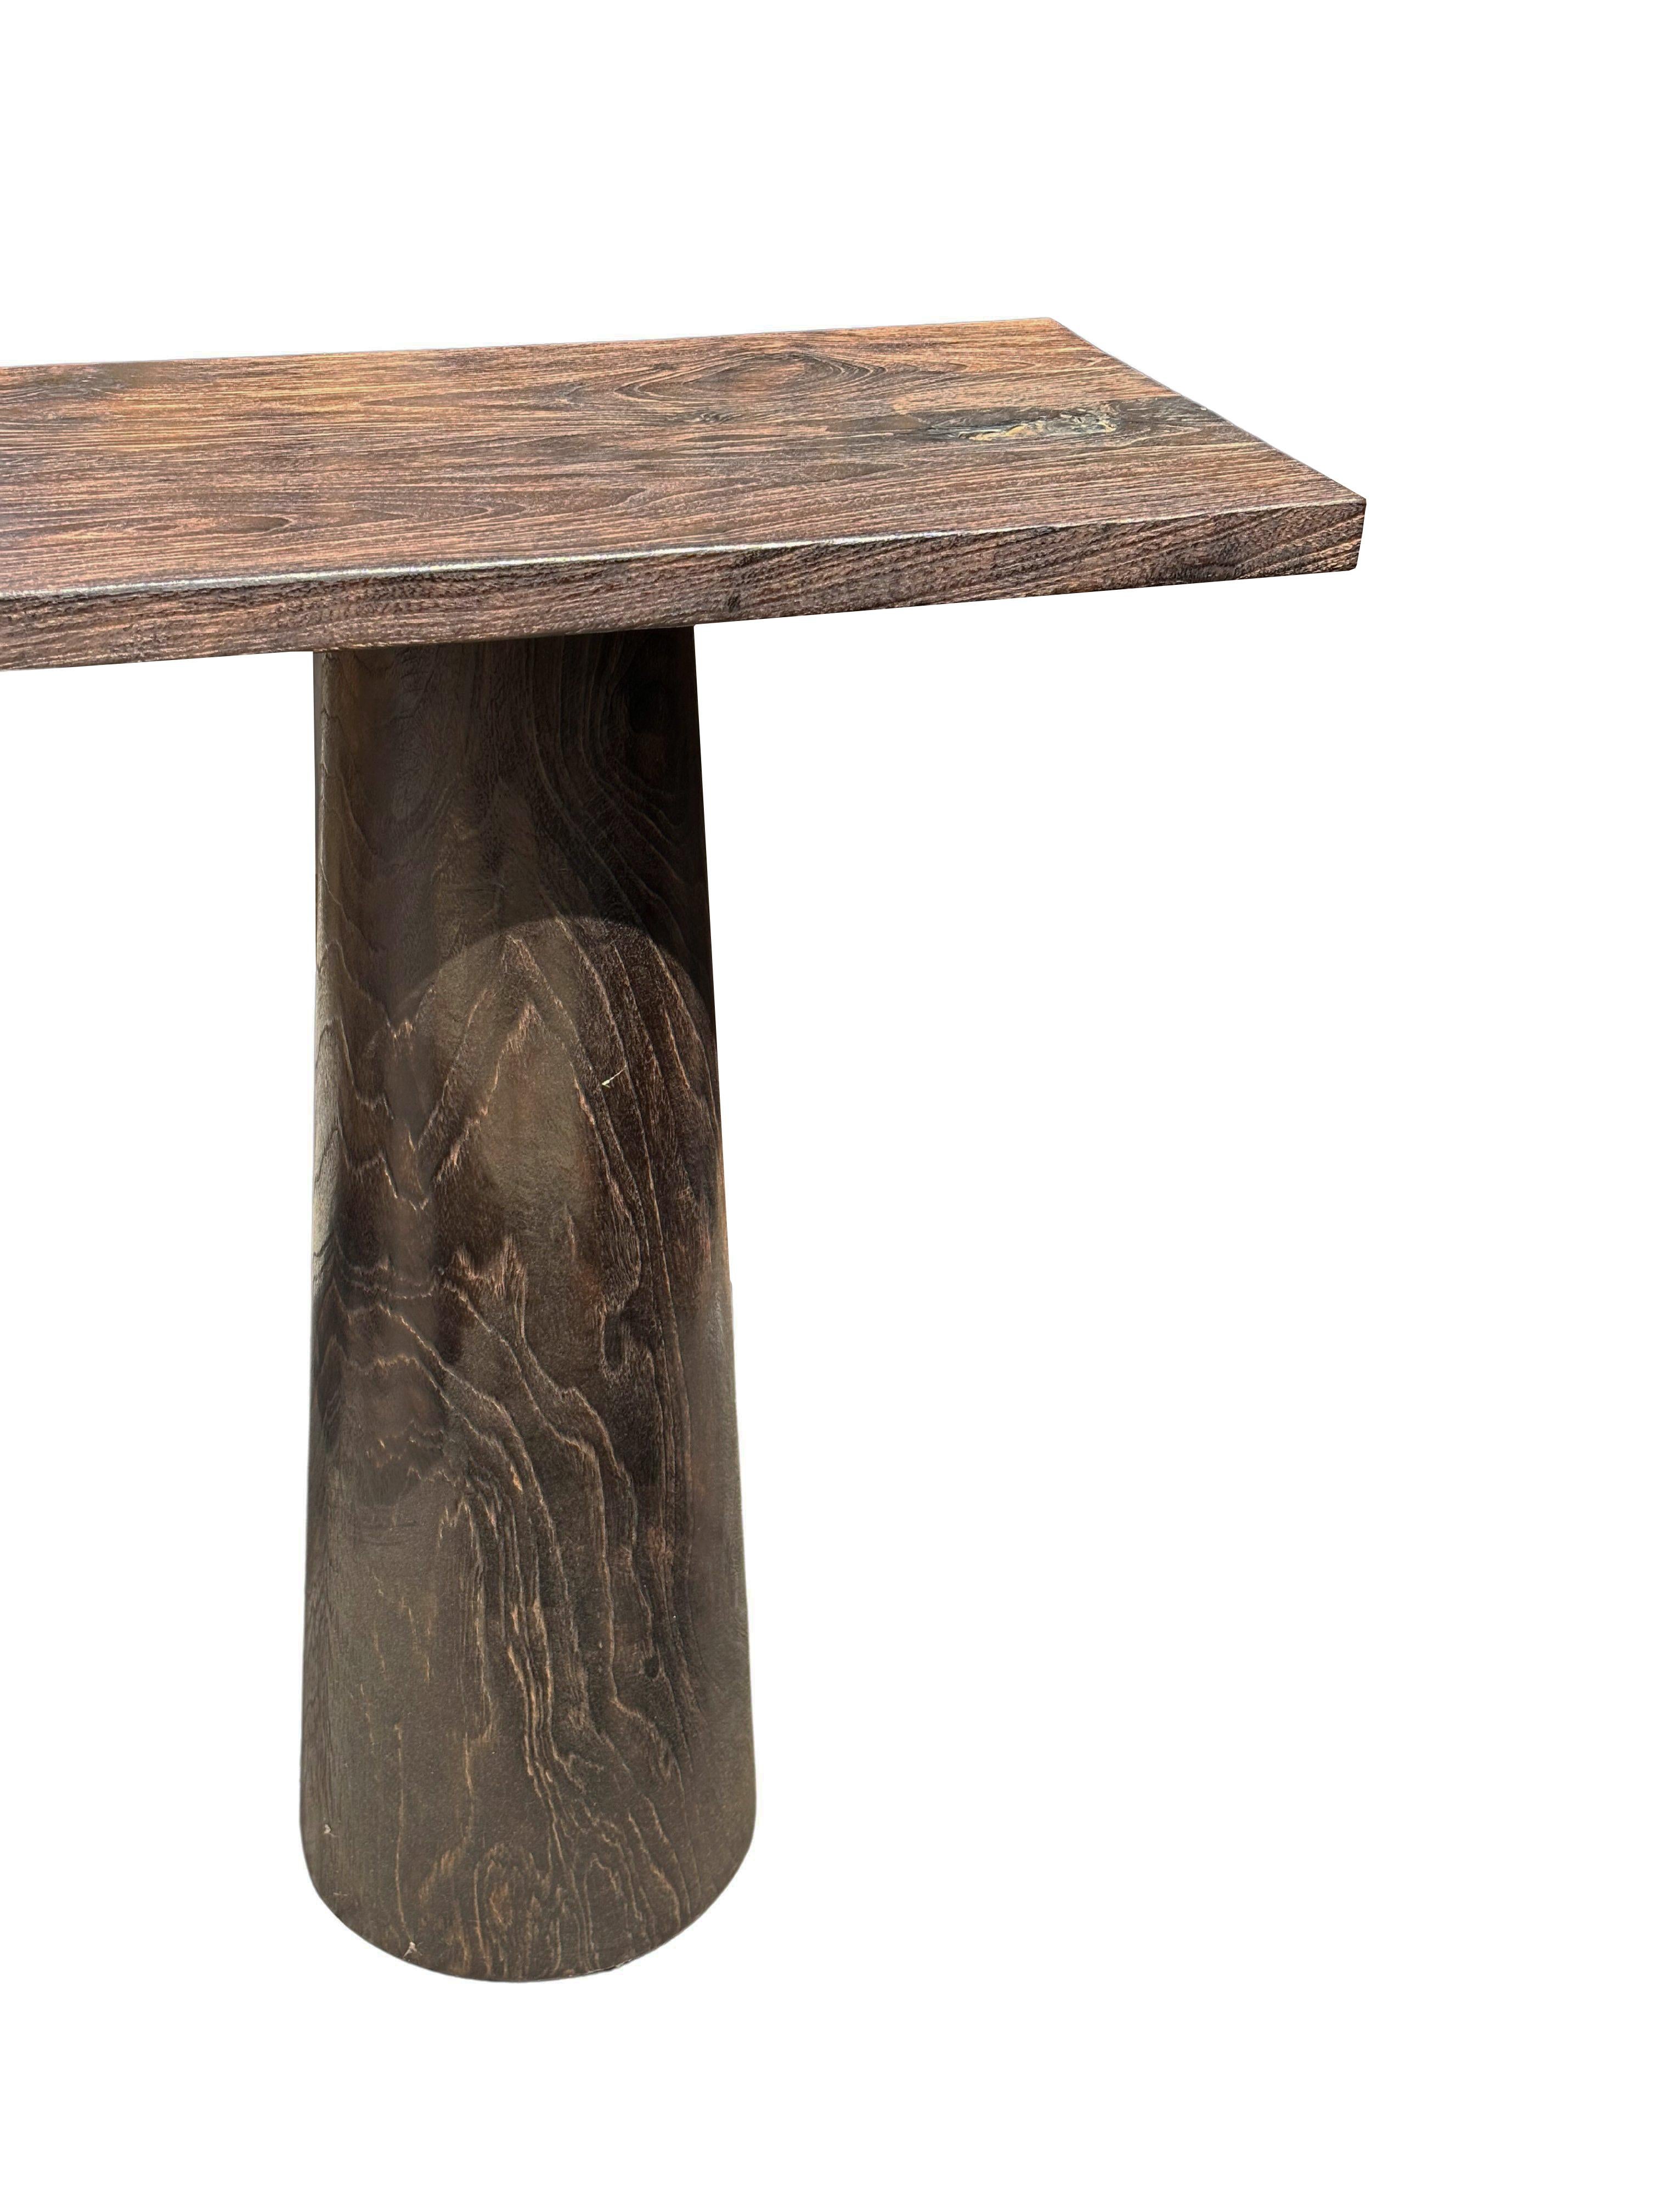 Indonesian Solid Teak Wood Console Table, Burnt Finish Modern Organic For Sale